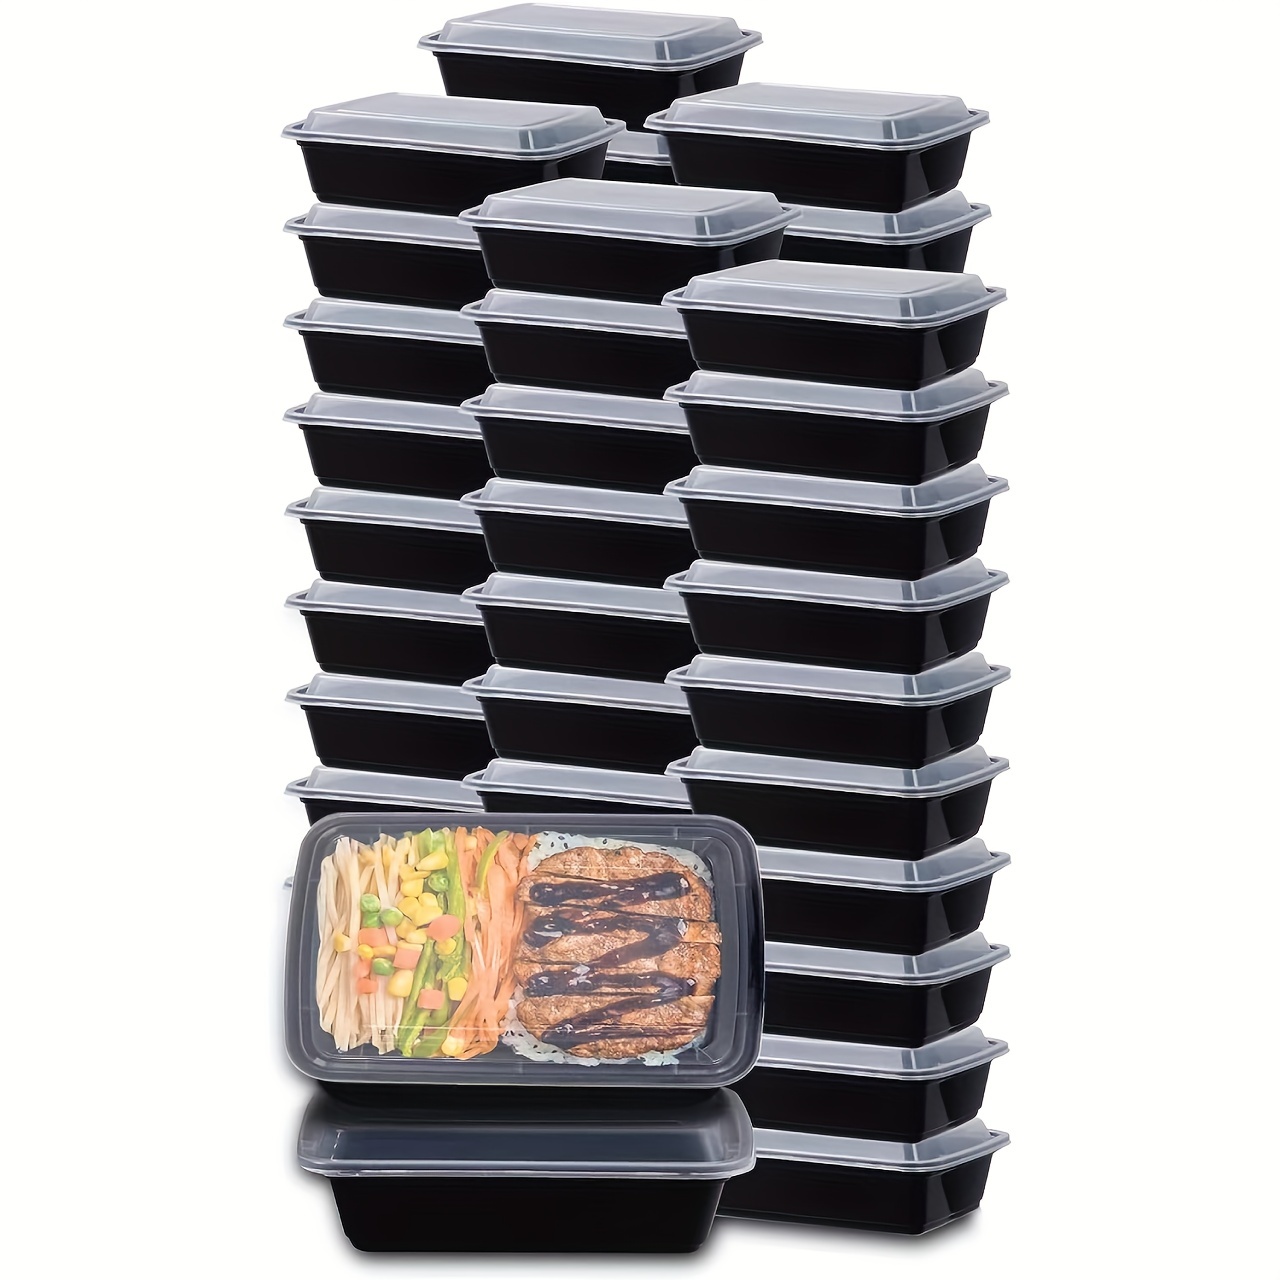 IUMÉ 50-Pack Meal Prep Containers, 26 oz Microwavable Reusable Containers with Lids for Food Prepping, Disposable Lunch Boxes, BPA Free Plastic